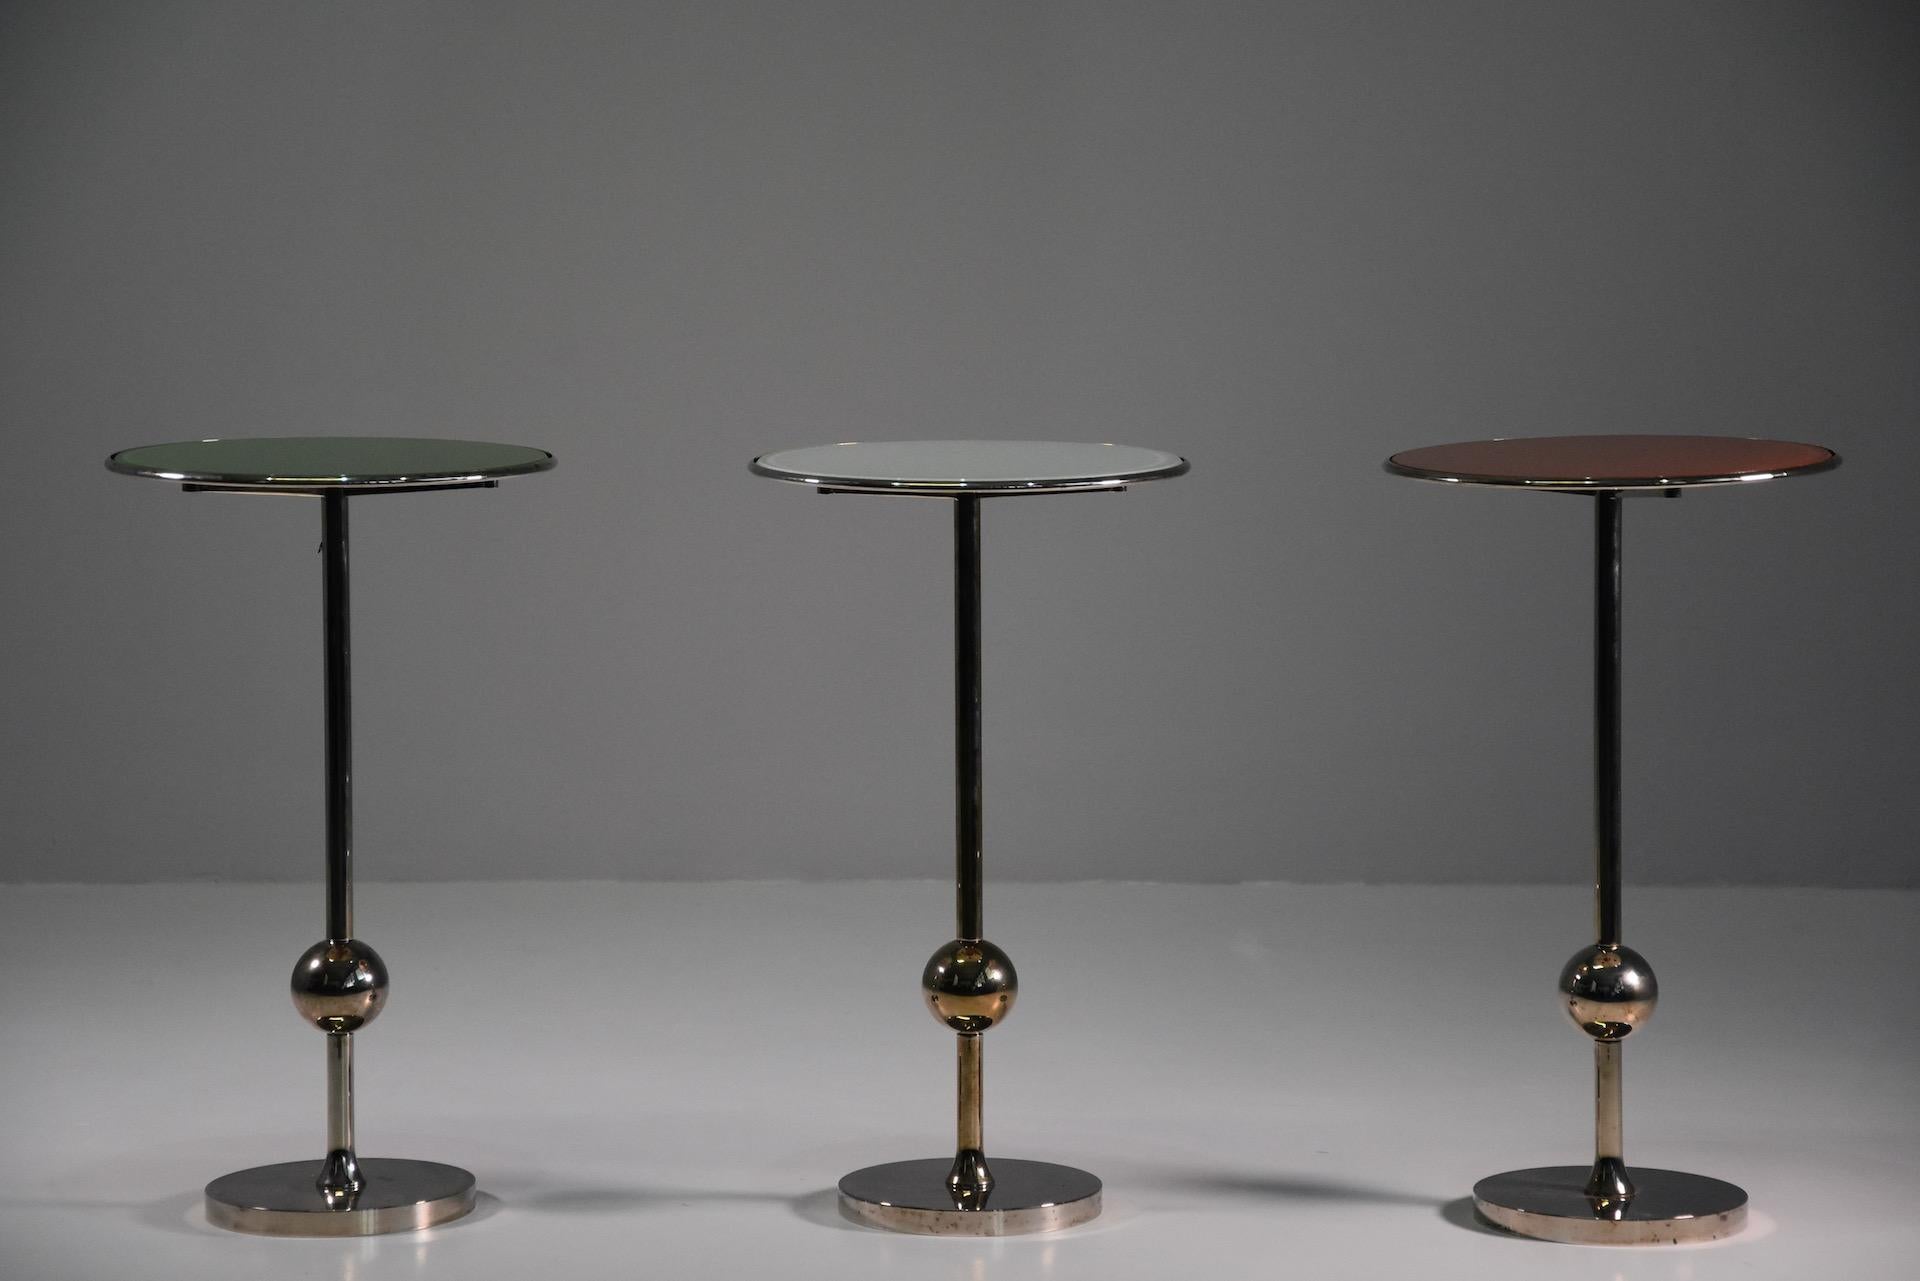 Rare three Italian side table T1 by Osvaldo Borsani in brass nickel and Reverse-painted glass,, 1950s.